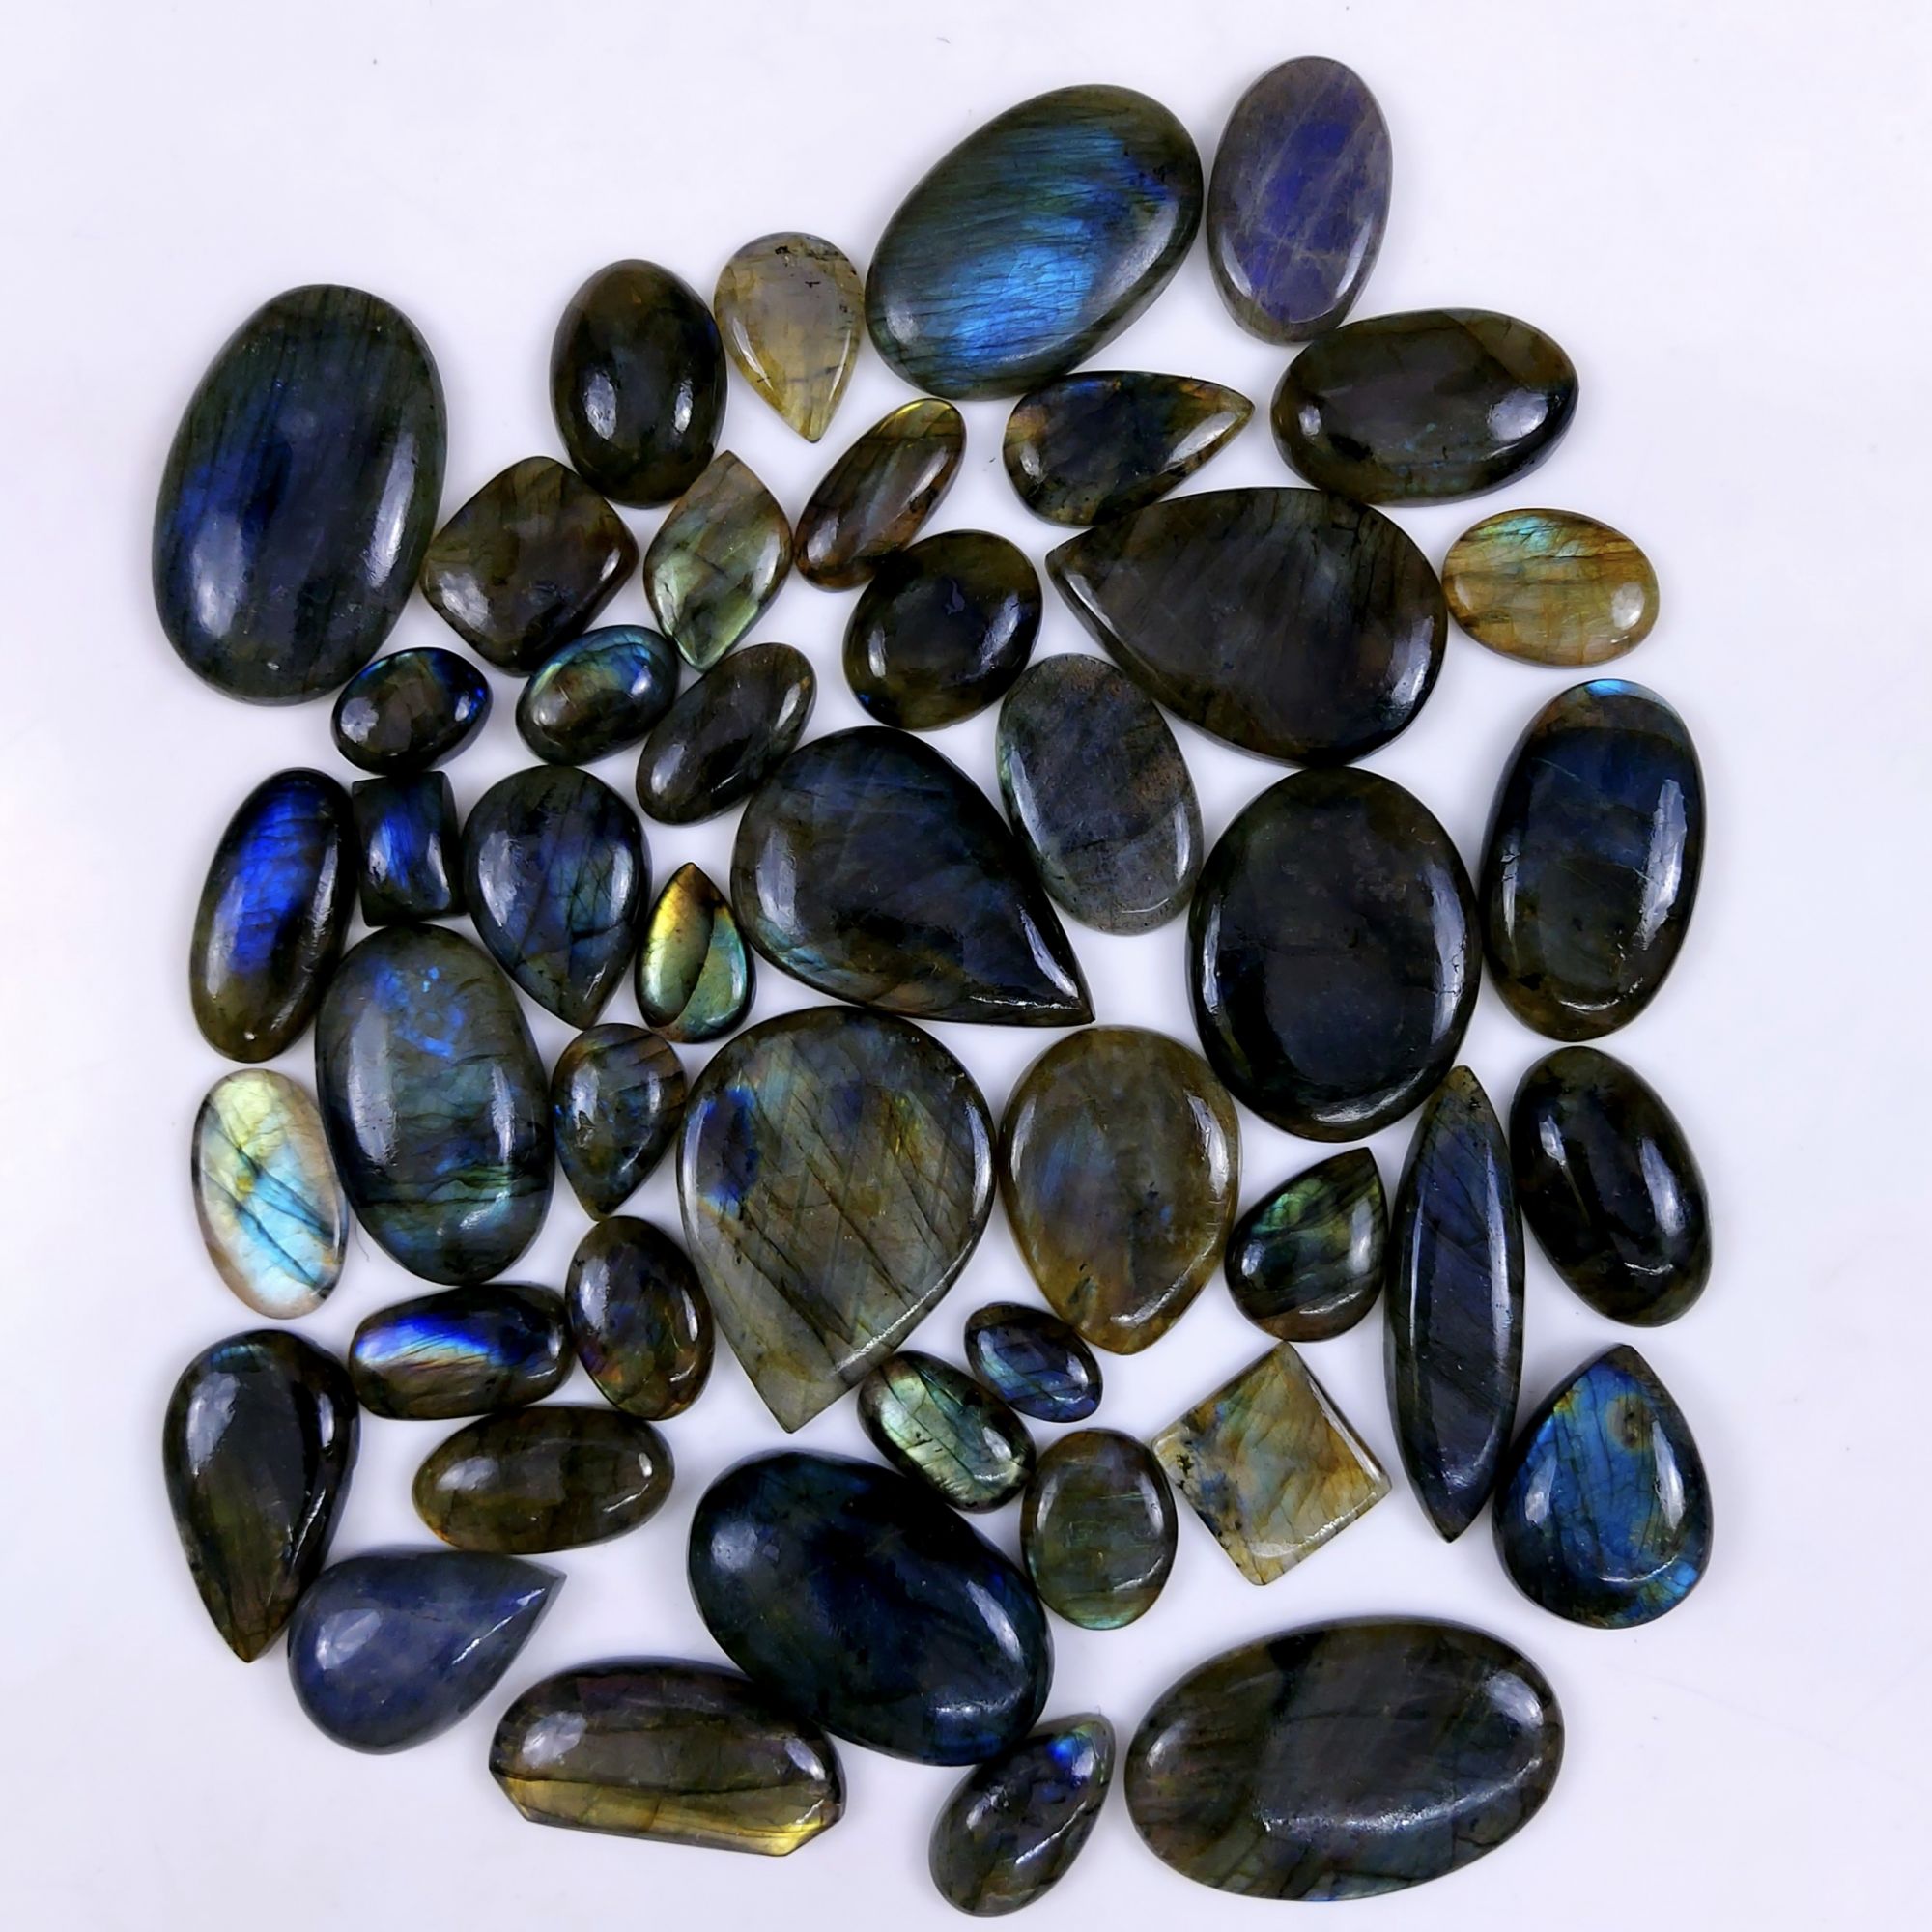 46pc 1569Cts Labradorite Cabochon Multifire Healing Crystal For Jewelry Supplies, Labradorite Necklace Handmade Wire Wrapped Gemstone Pendant 45x35 18x13mm#6315